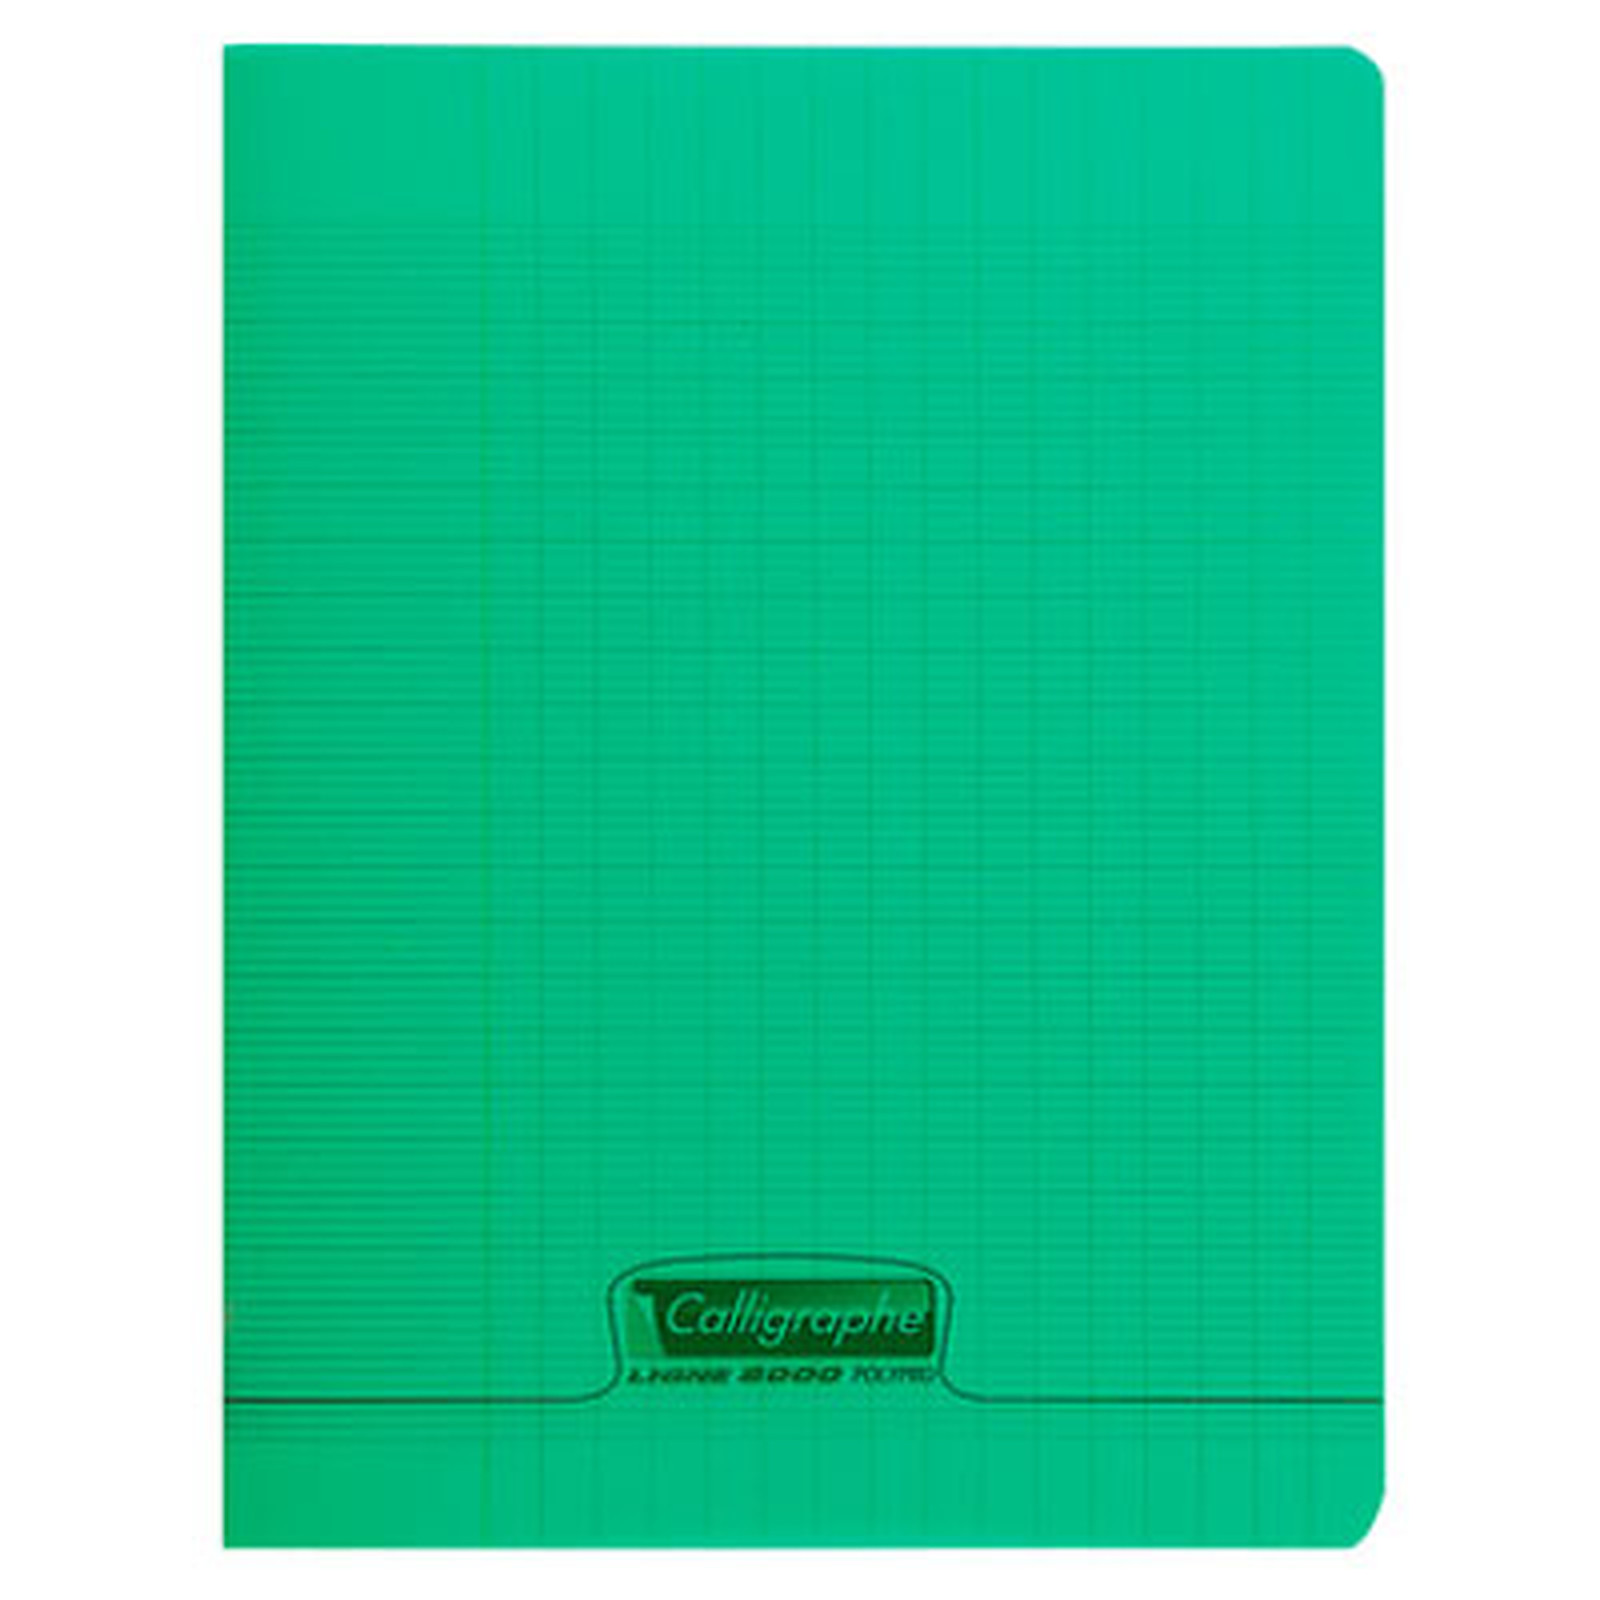 Calligraphe 8000 Polypro Cahier 96 pages 17 x 22 cm seyes grands carreaux Vert - Cahier Calligraphe